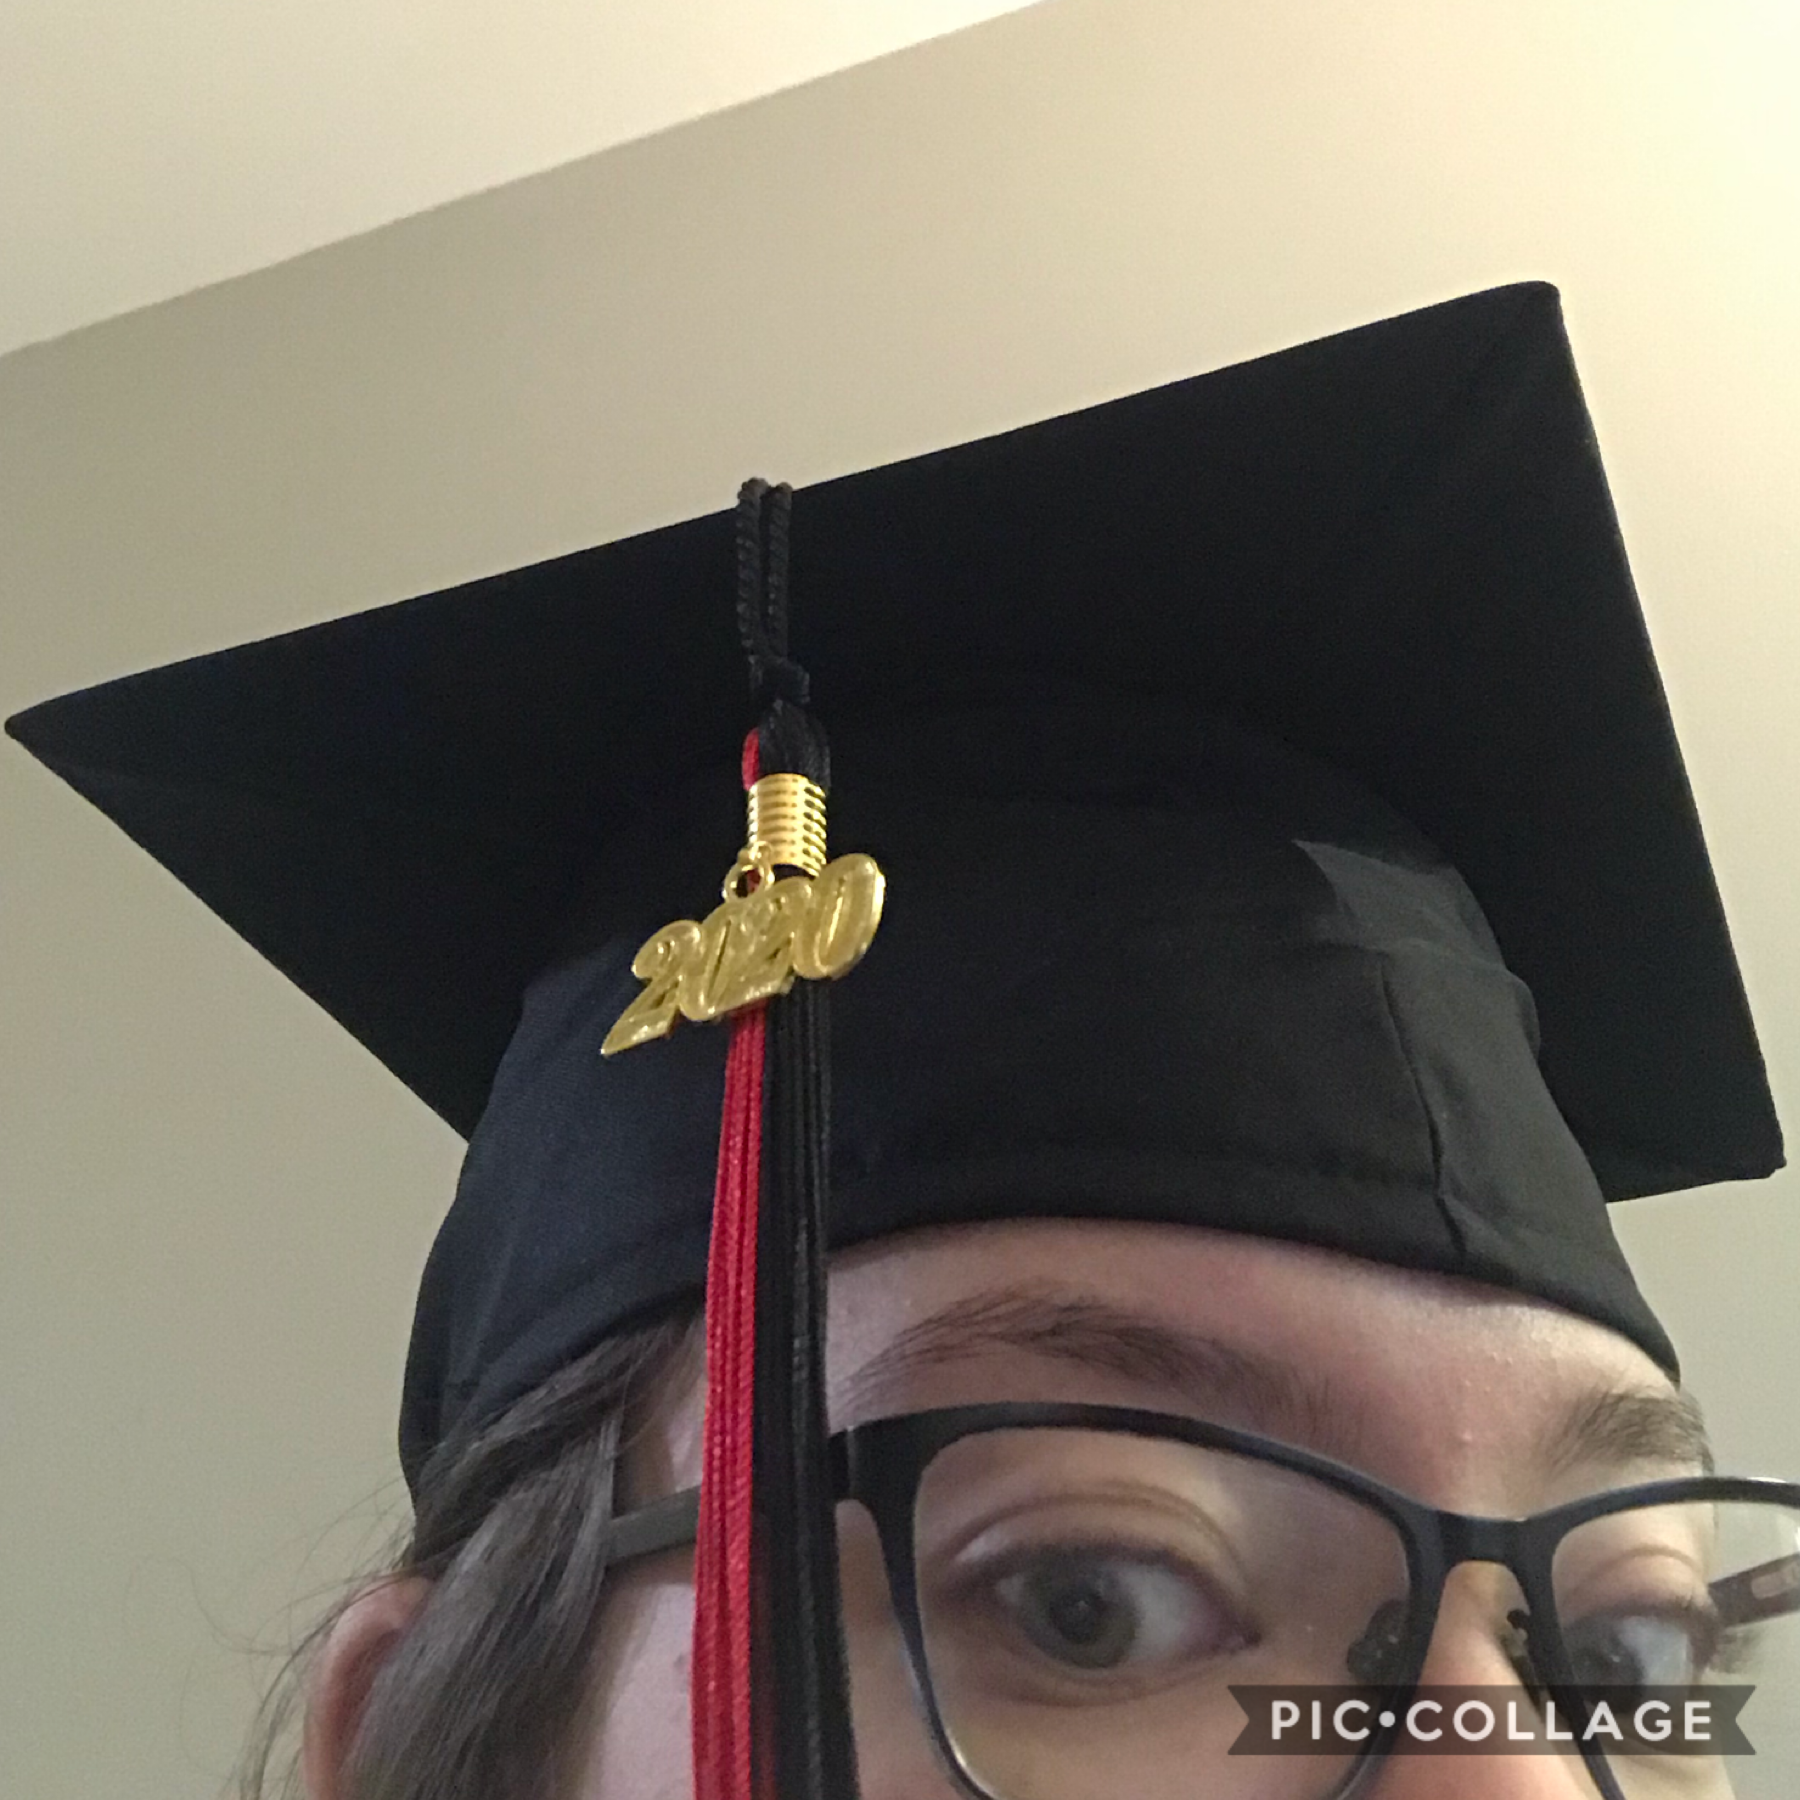 BROSKISSSSSSS WE GOT OUR CAPS AND GOWNS THE OTHER DAY